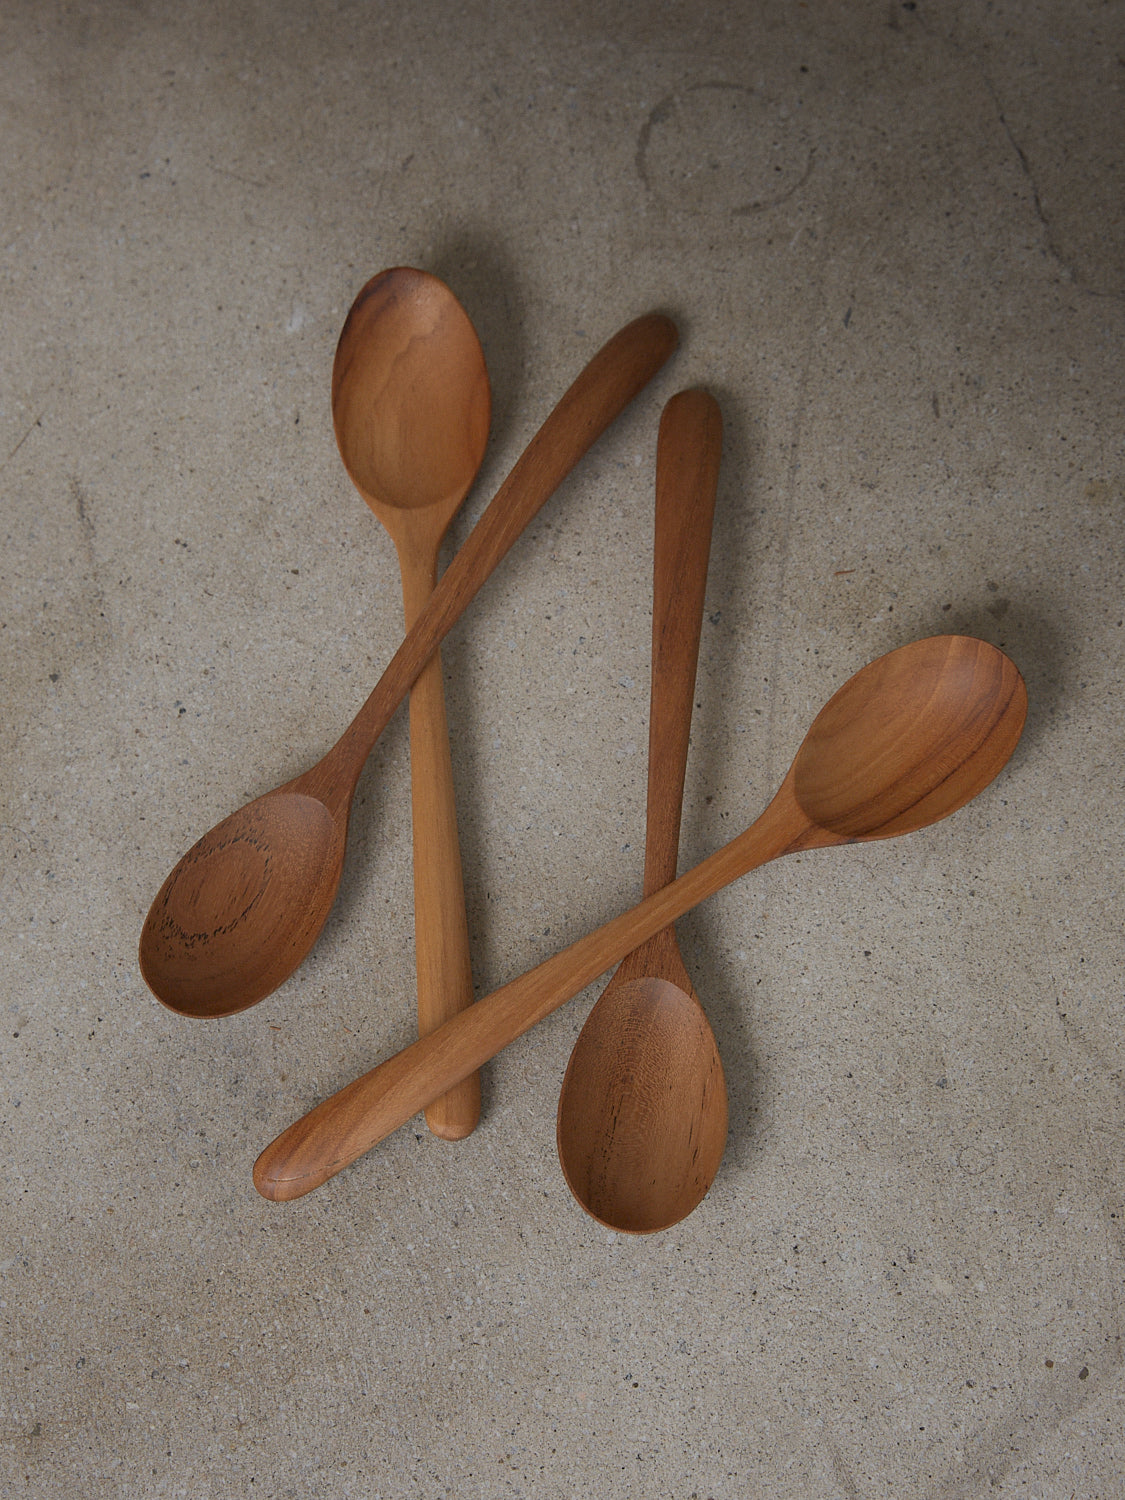 Elegant, elongated mixing spoon with arched handle, hand carved from natural teak wood.